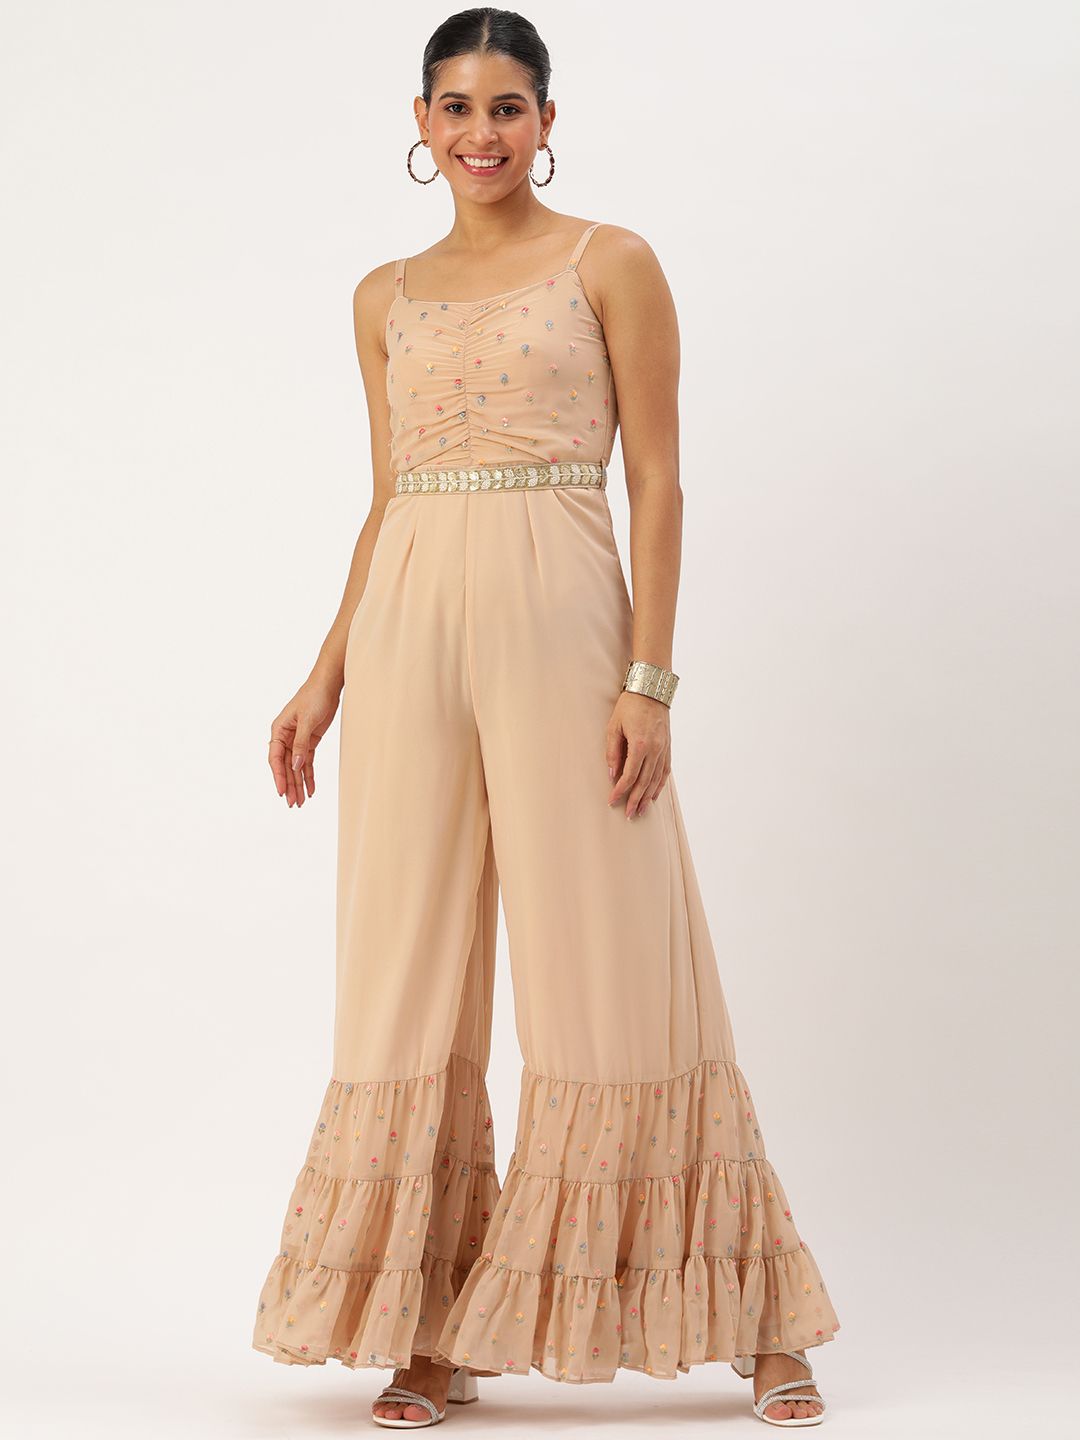 Ethnovog Embroidered Culotte Jumpsuit with Belt Price in India